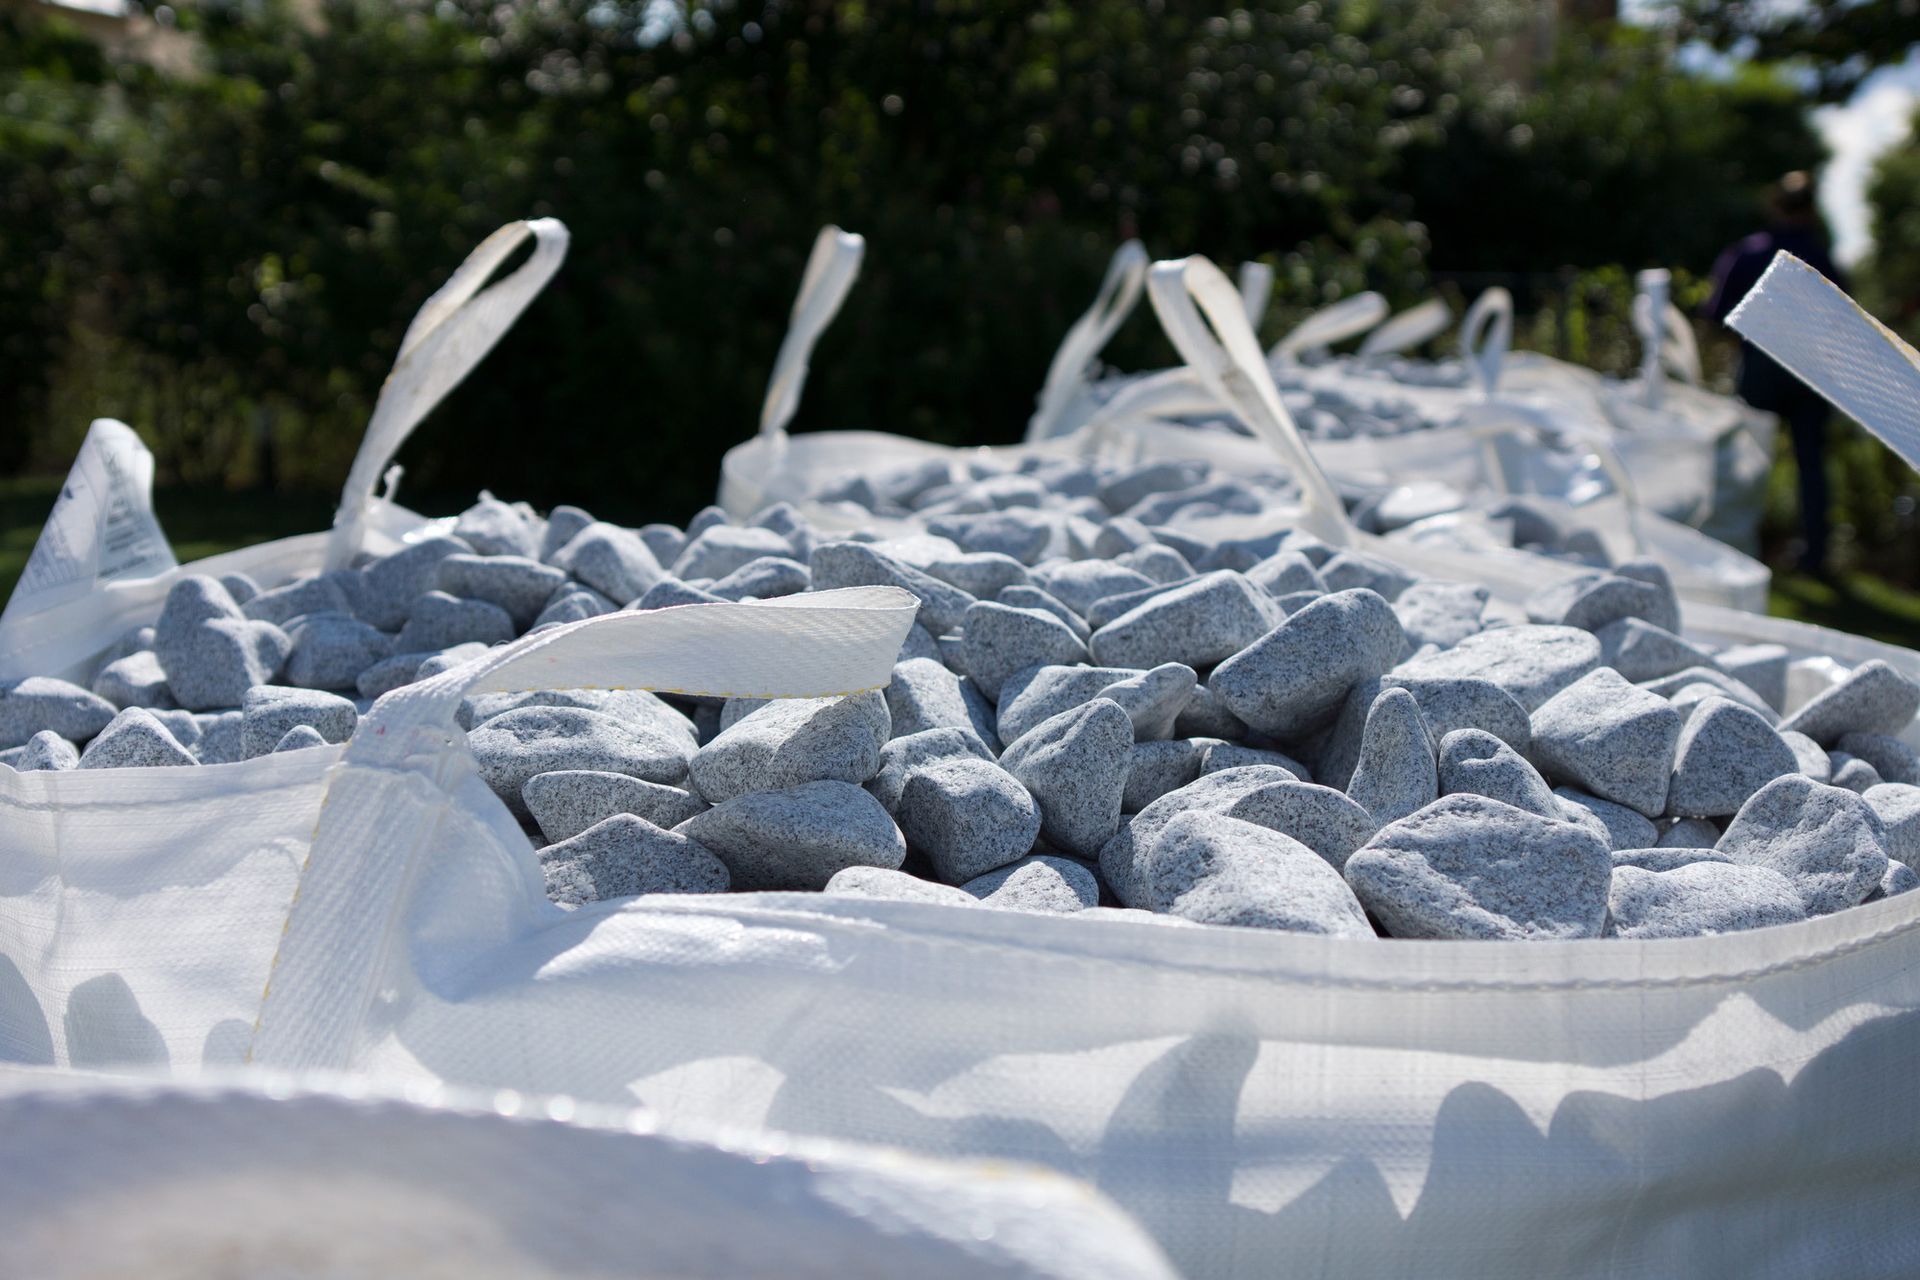 a pile of white bags filled with rocks is sitting on the ground